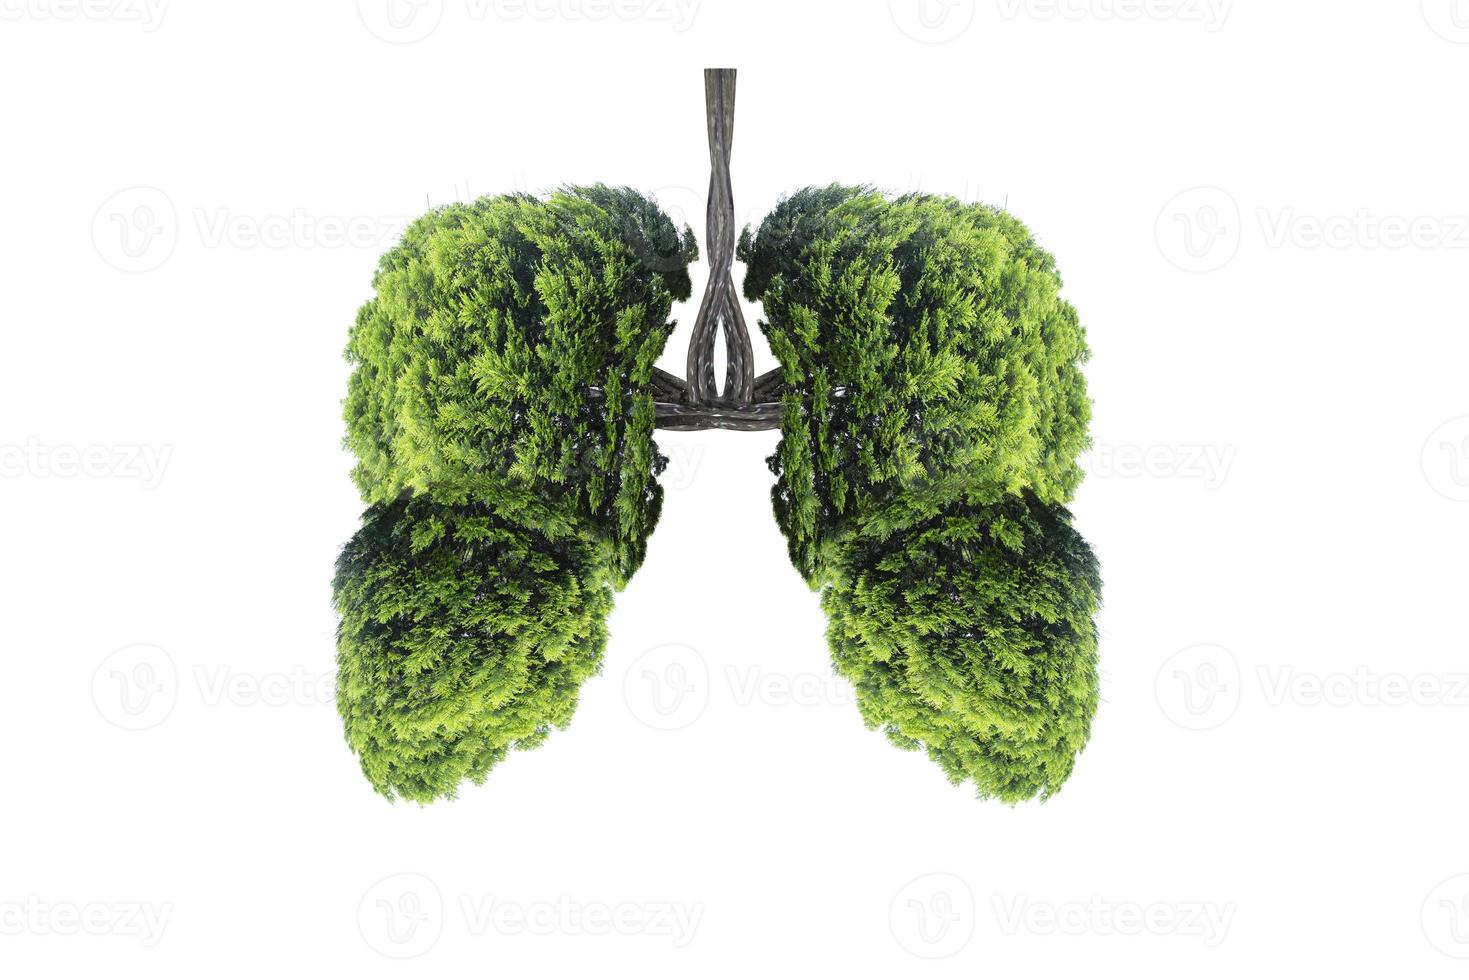 Illustration of lung tree Environment and Medicine photo